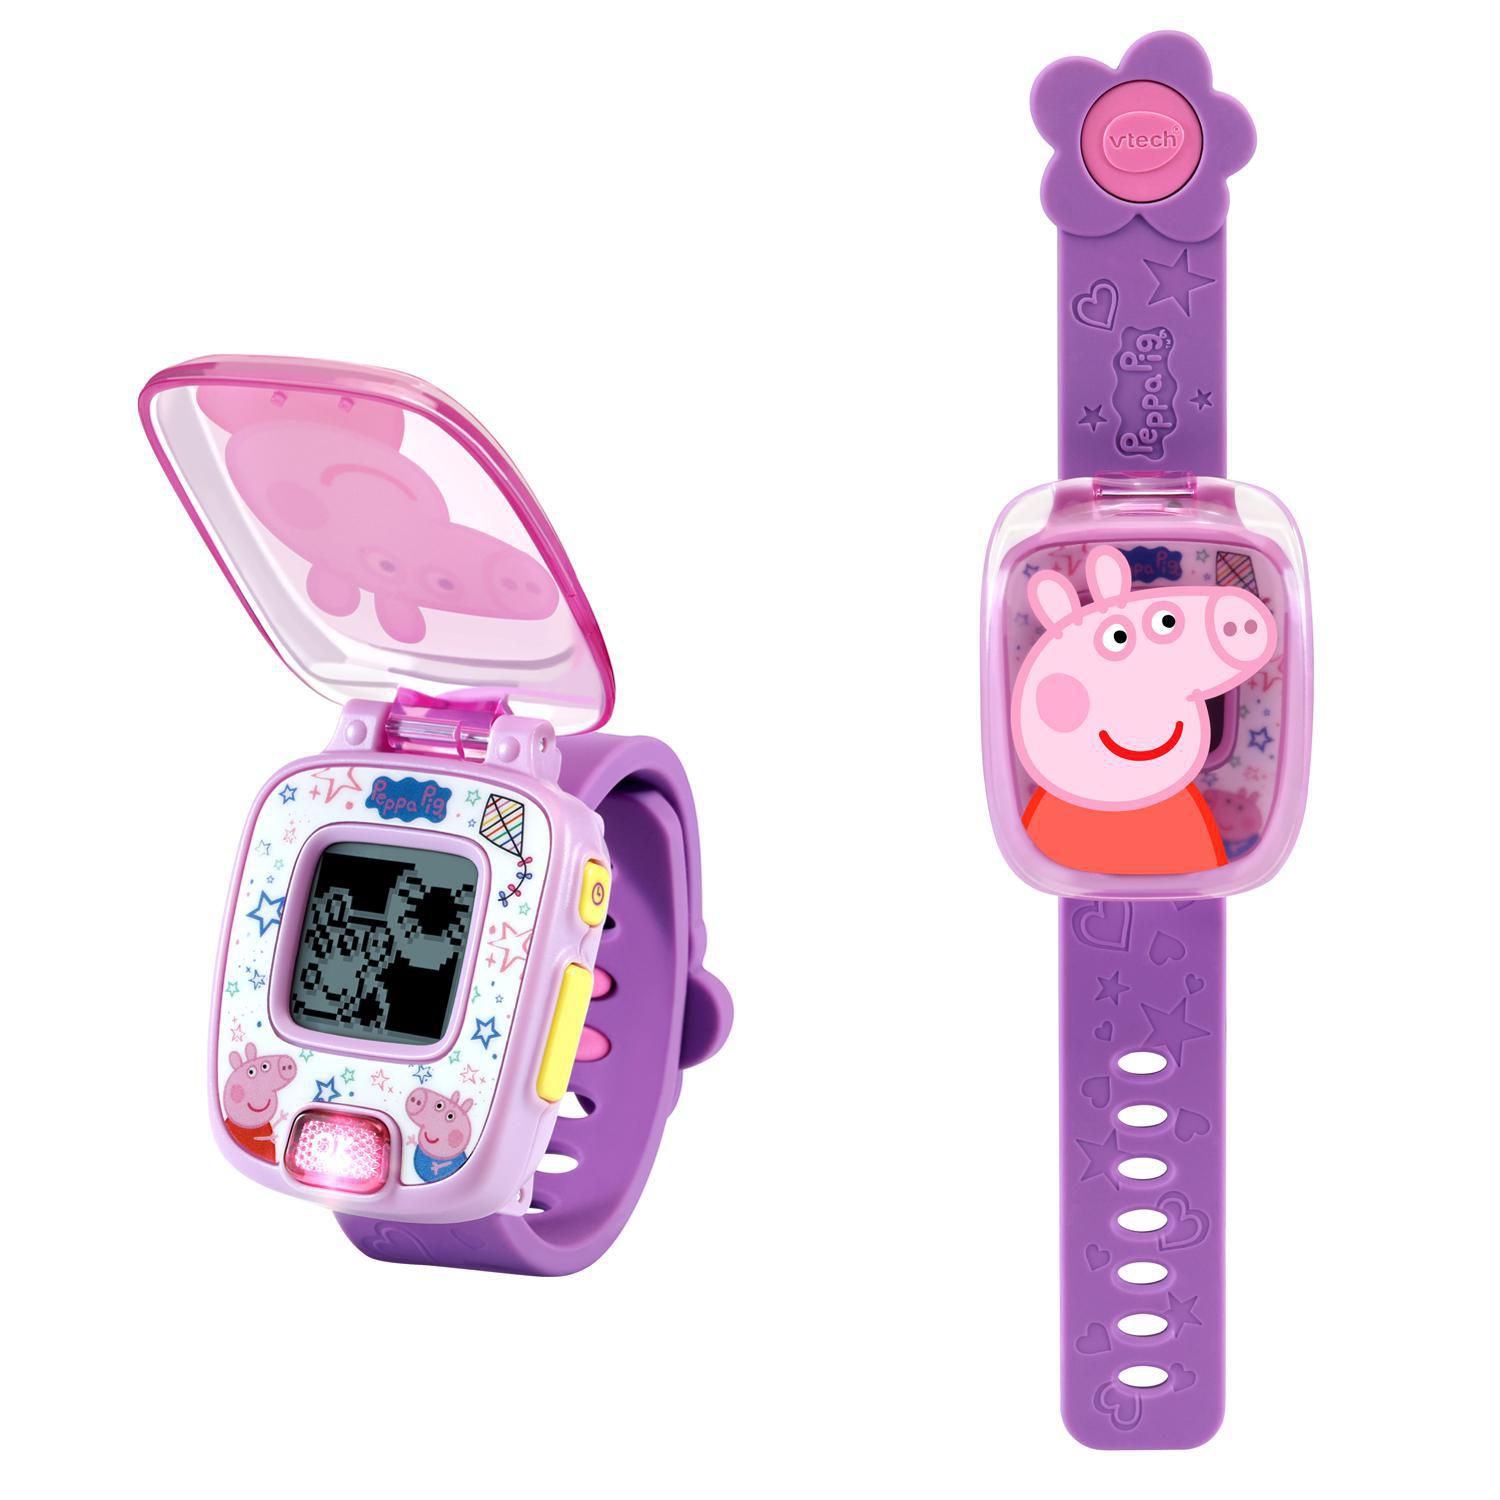 Peppa Pig Vtech Cheaper Than Retail Price Buy Clothing Accessories And Lifestyle Products For Women Men